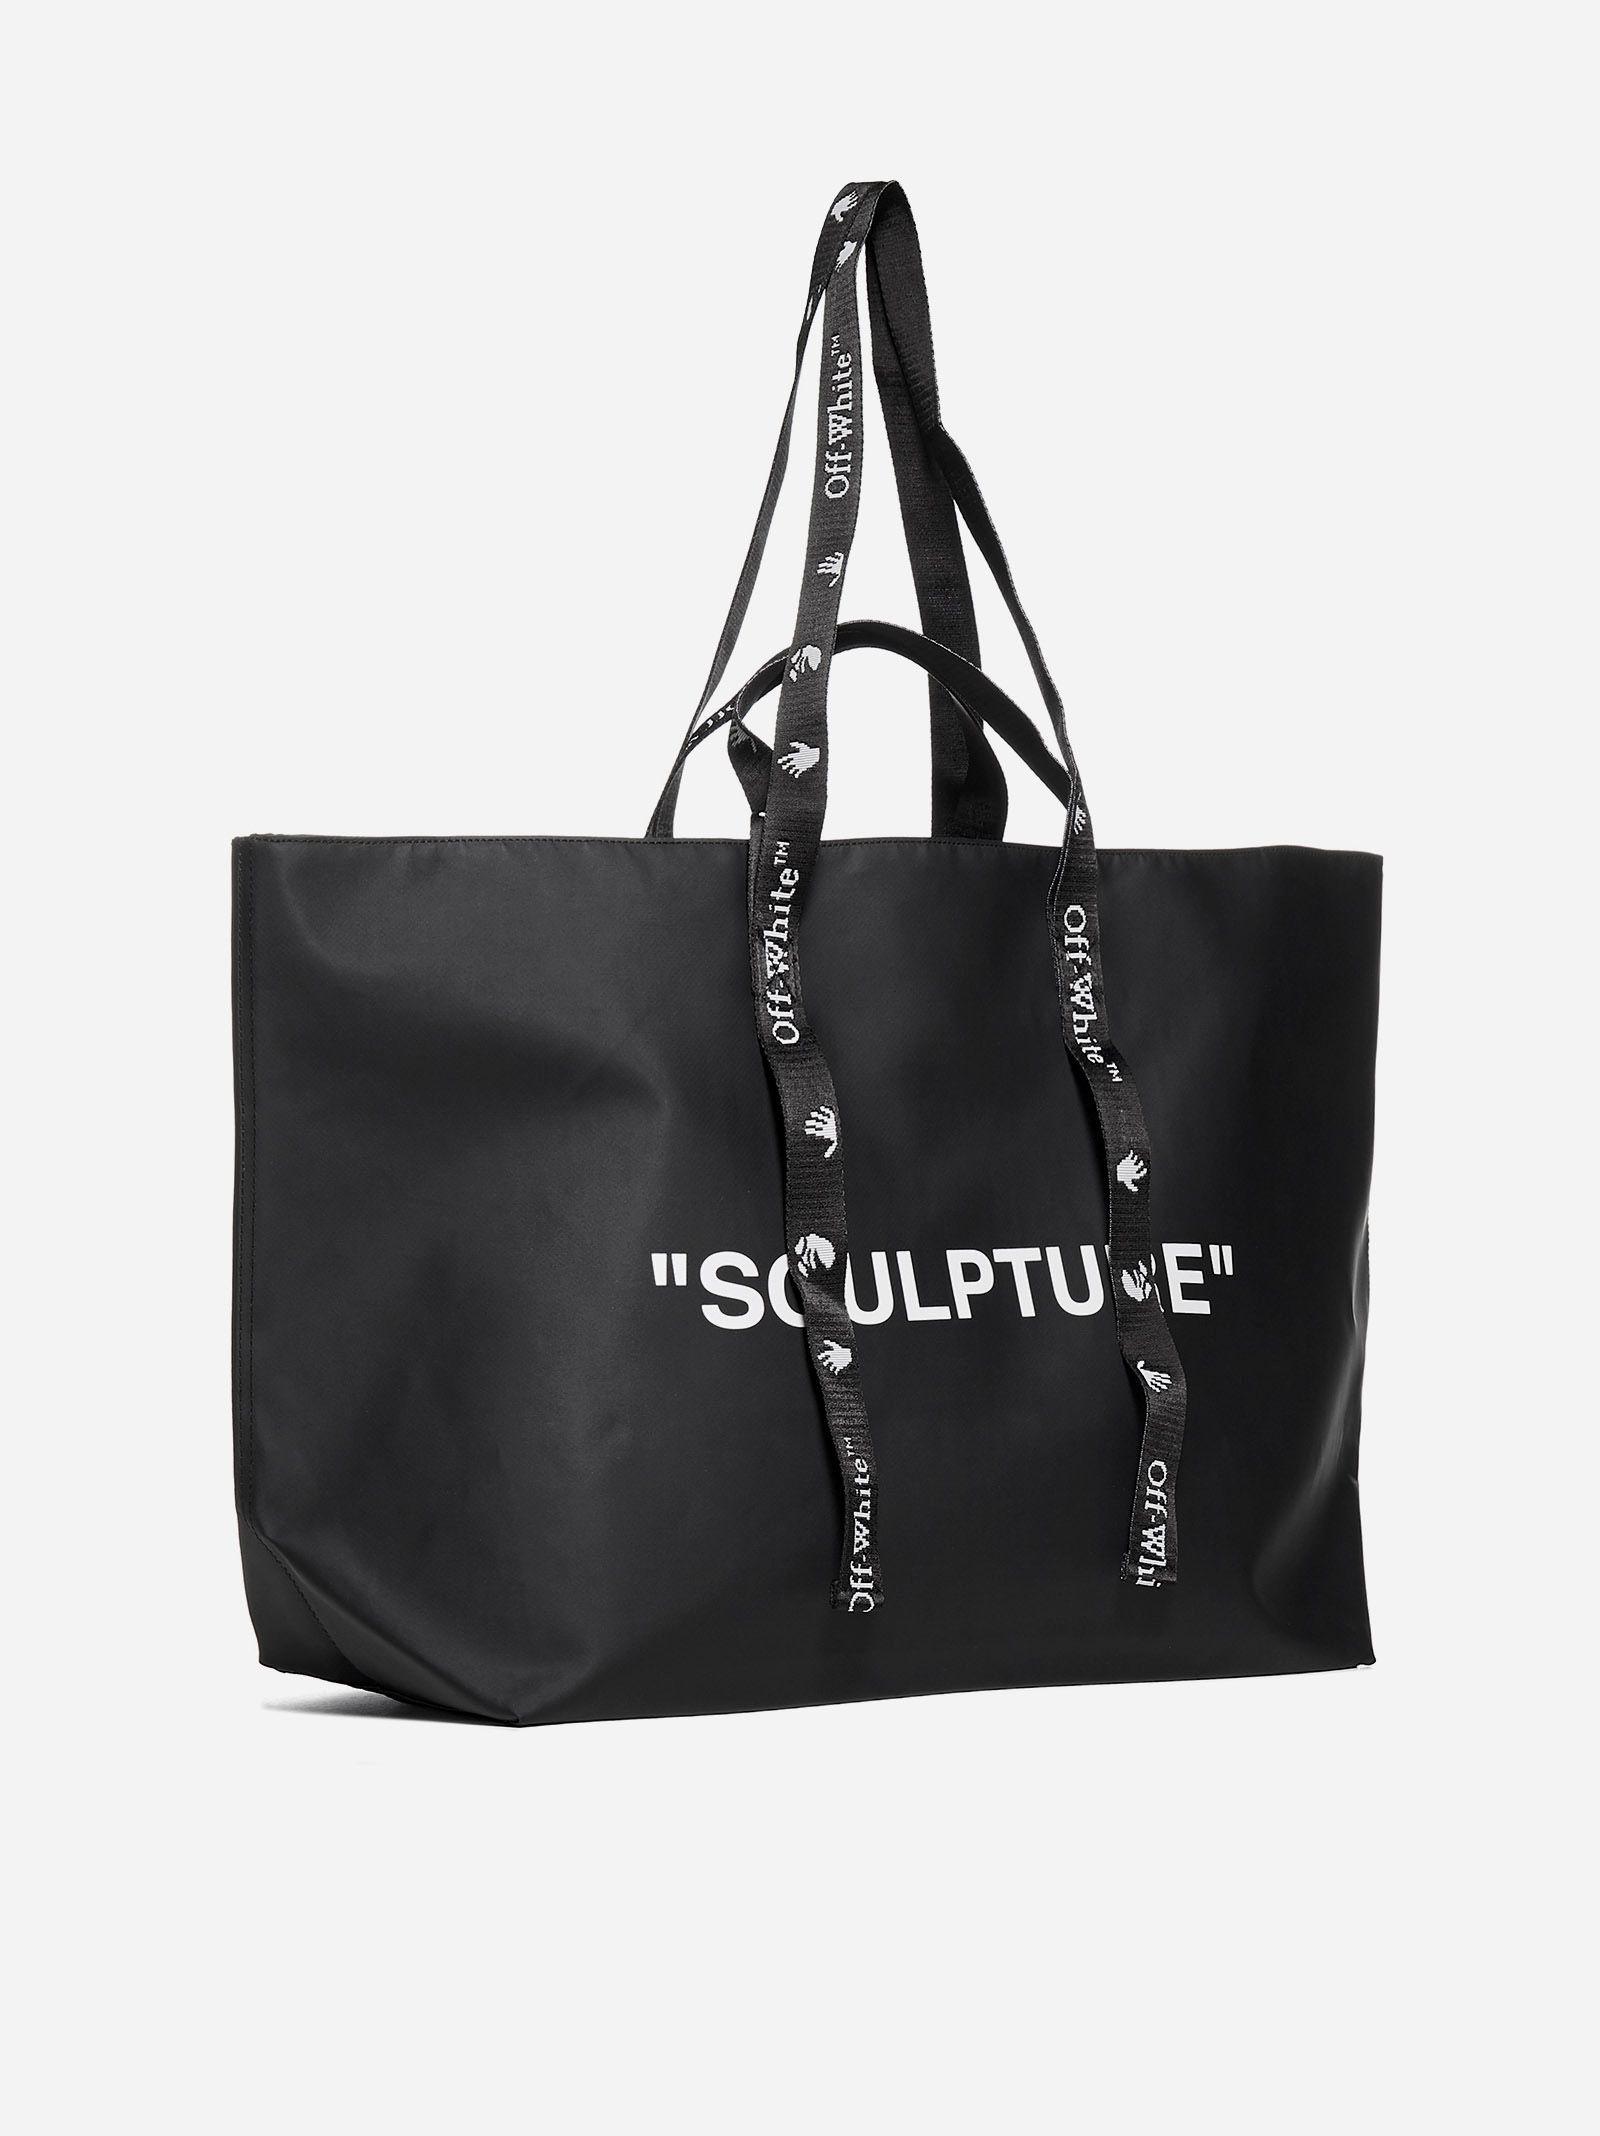 Off-White™ Sculpture Tote Bag in White Colorway